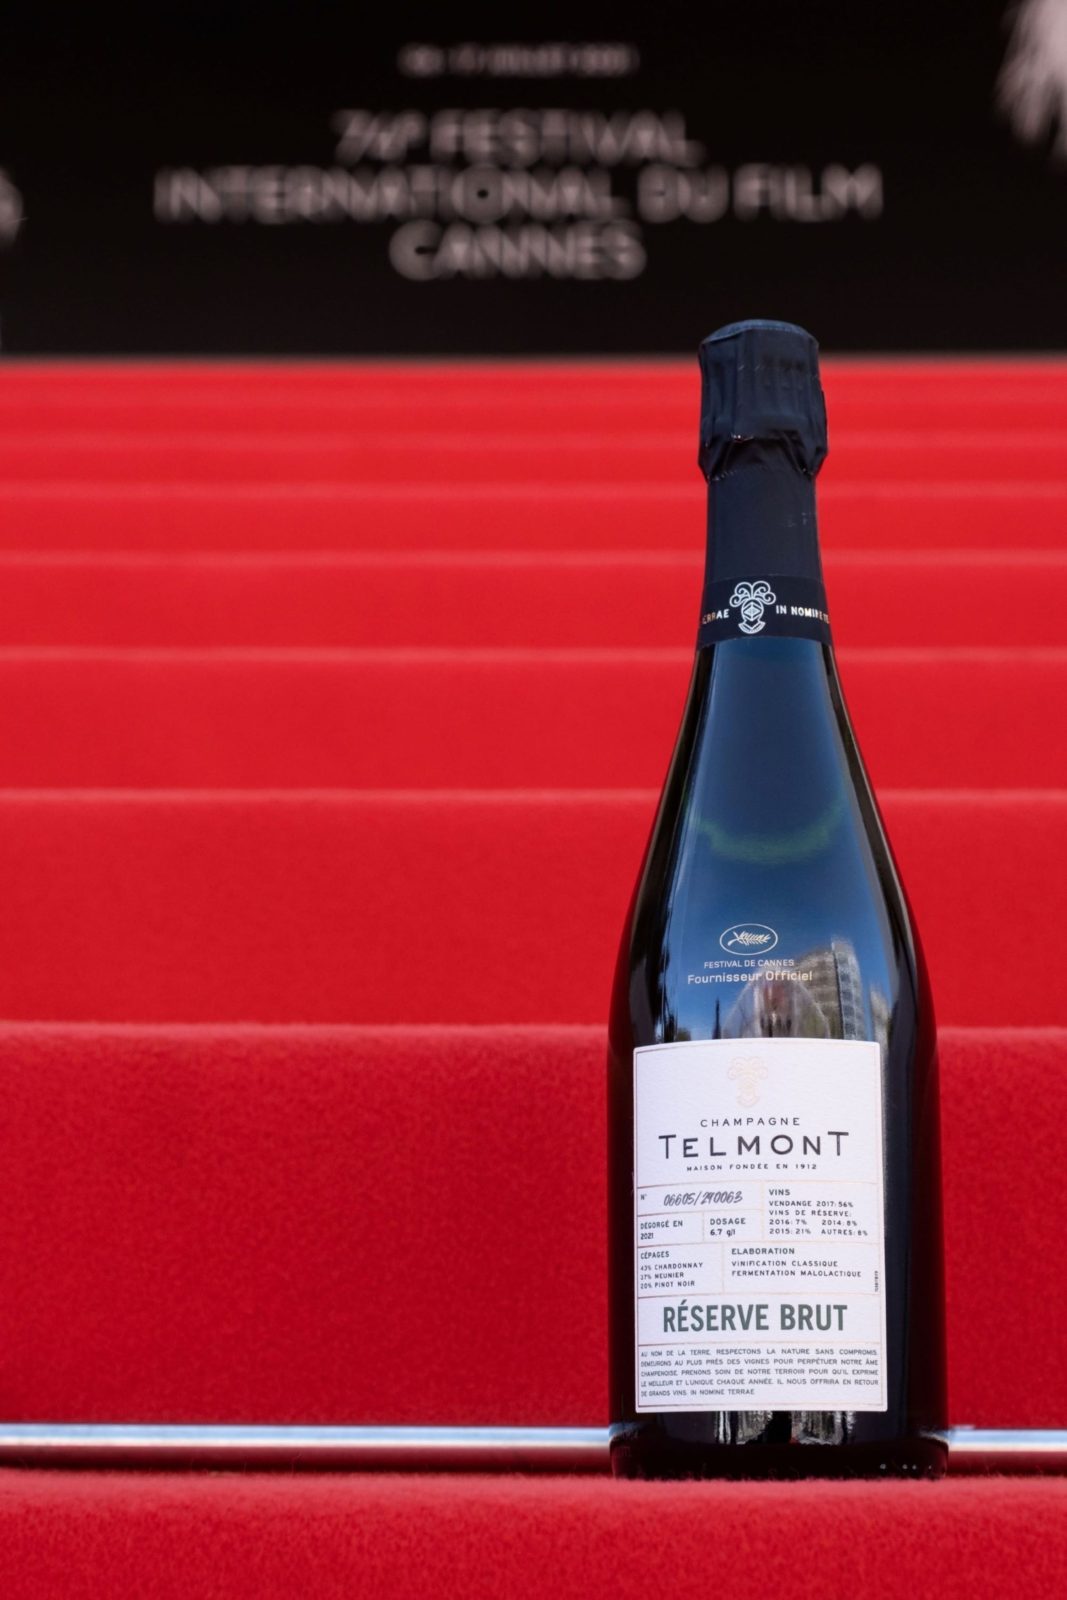 Cannes Film Festival And Champagne Telmont Partner Together For Third Year